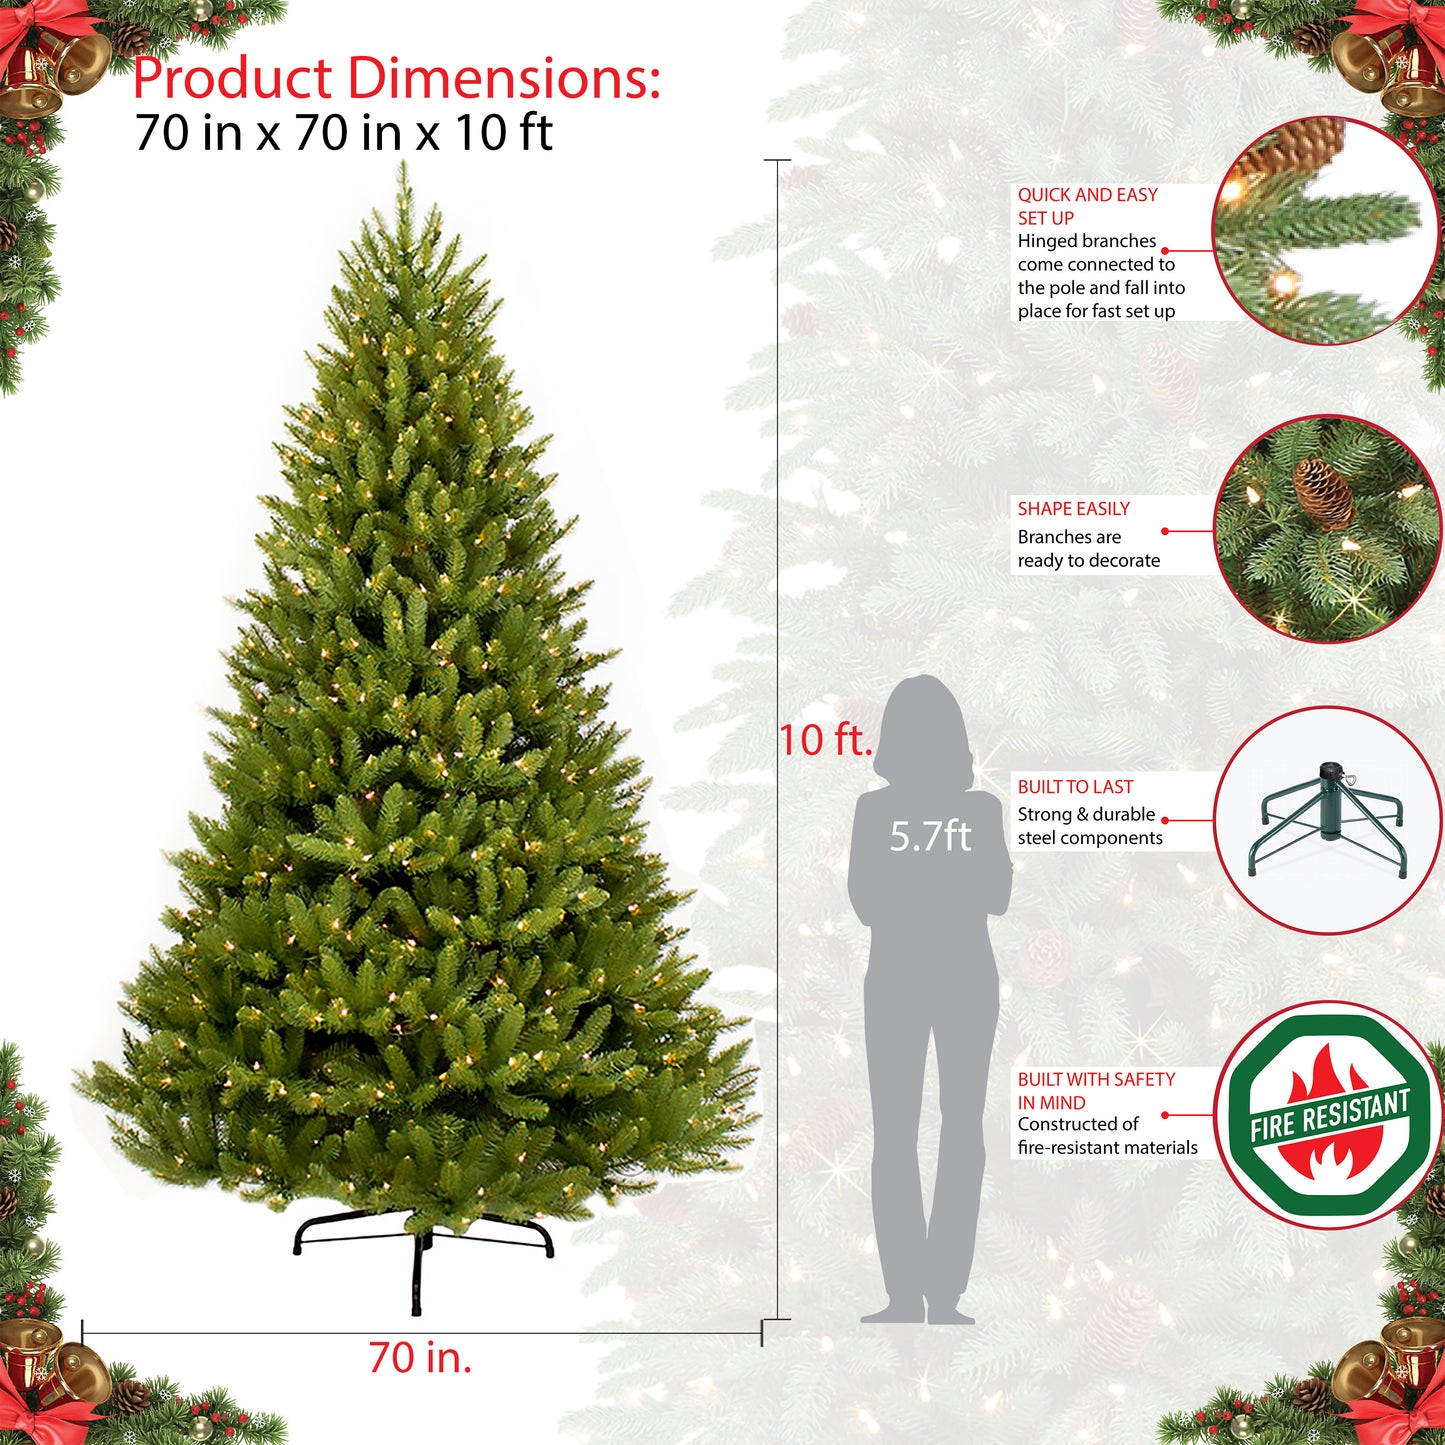 10' Pre-Lit  Fraser Fir Artificial Christmas Tree with 1300 Clear UL-Listed Lights